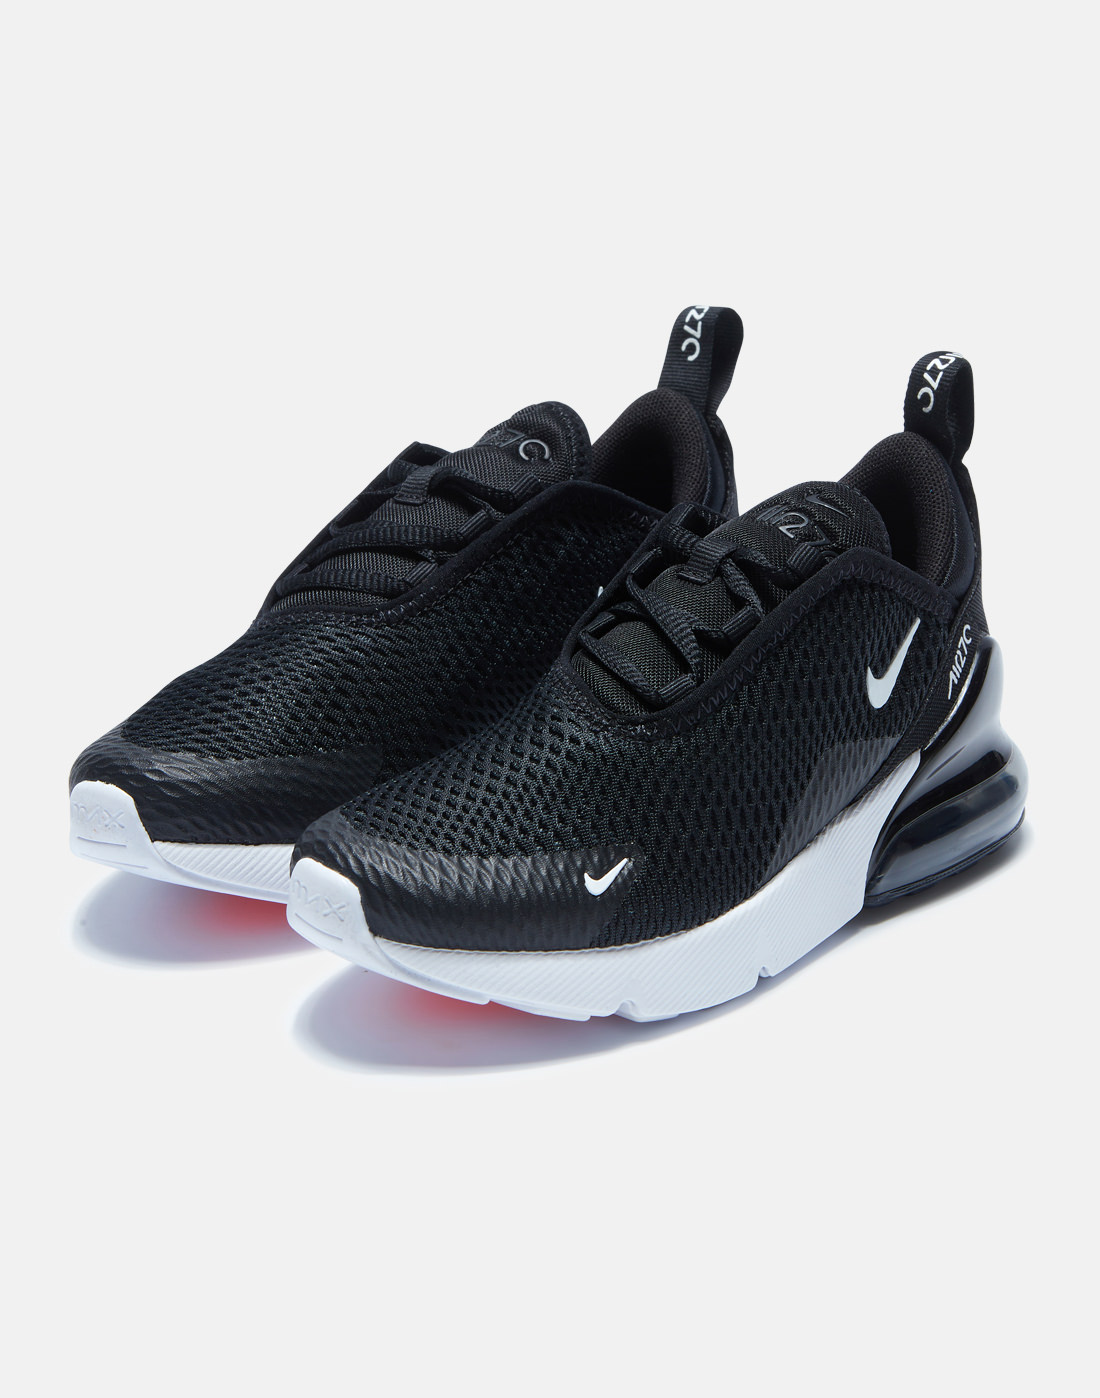 Nike Younger Kids Air Max 270 - Black | Life Style Sports IE